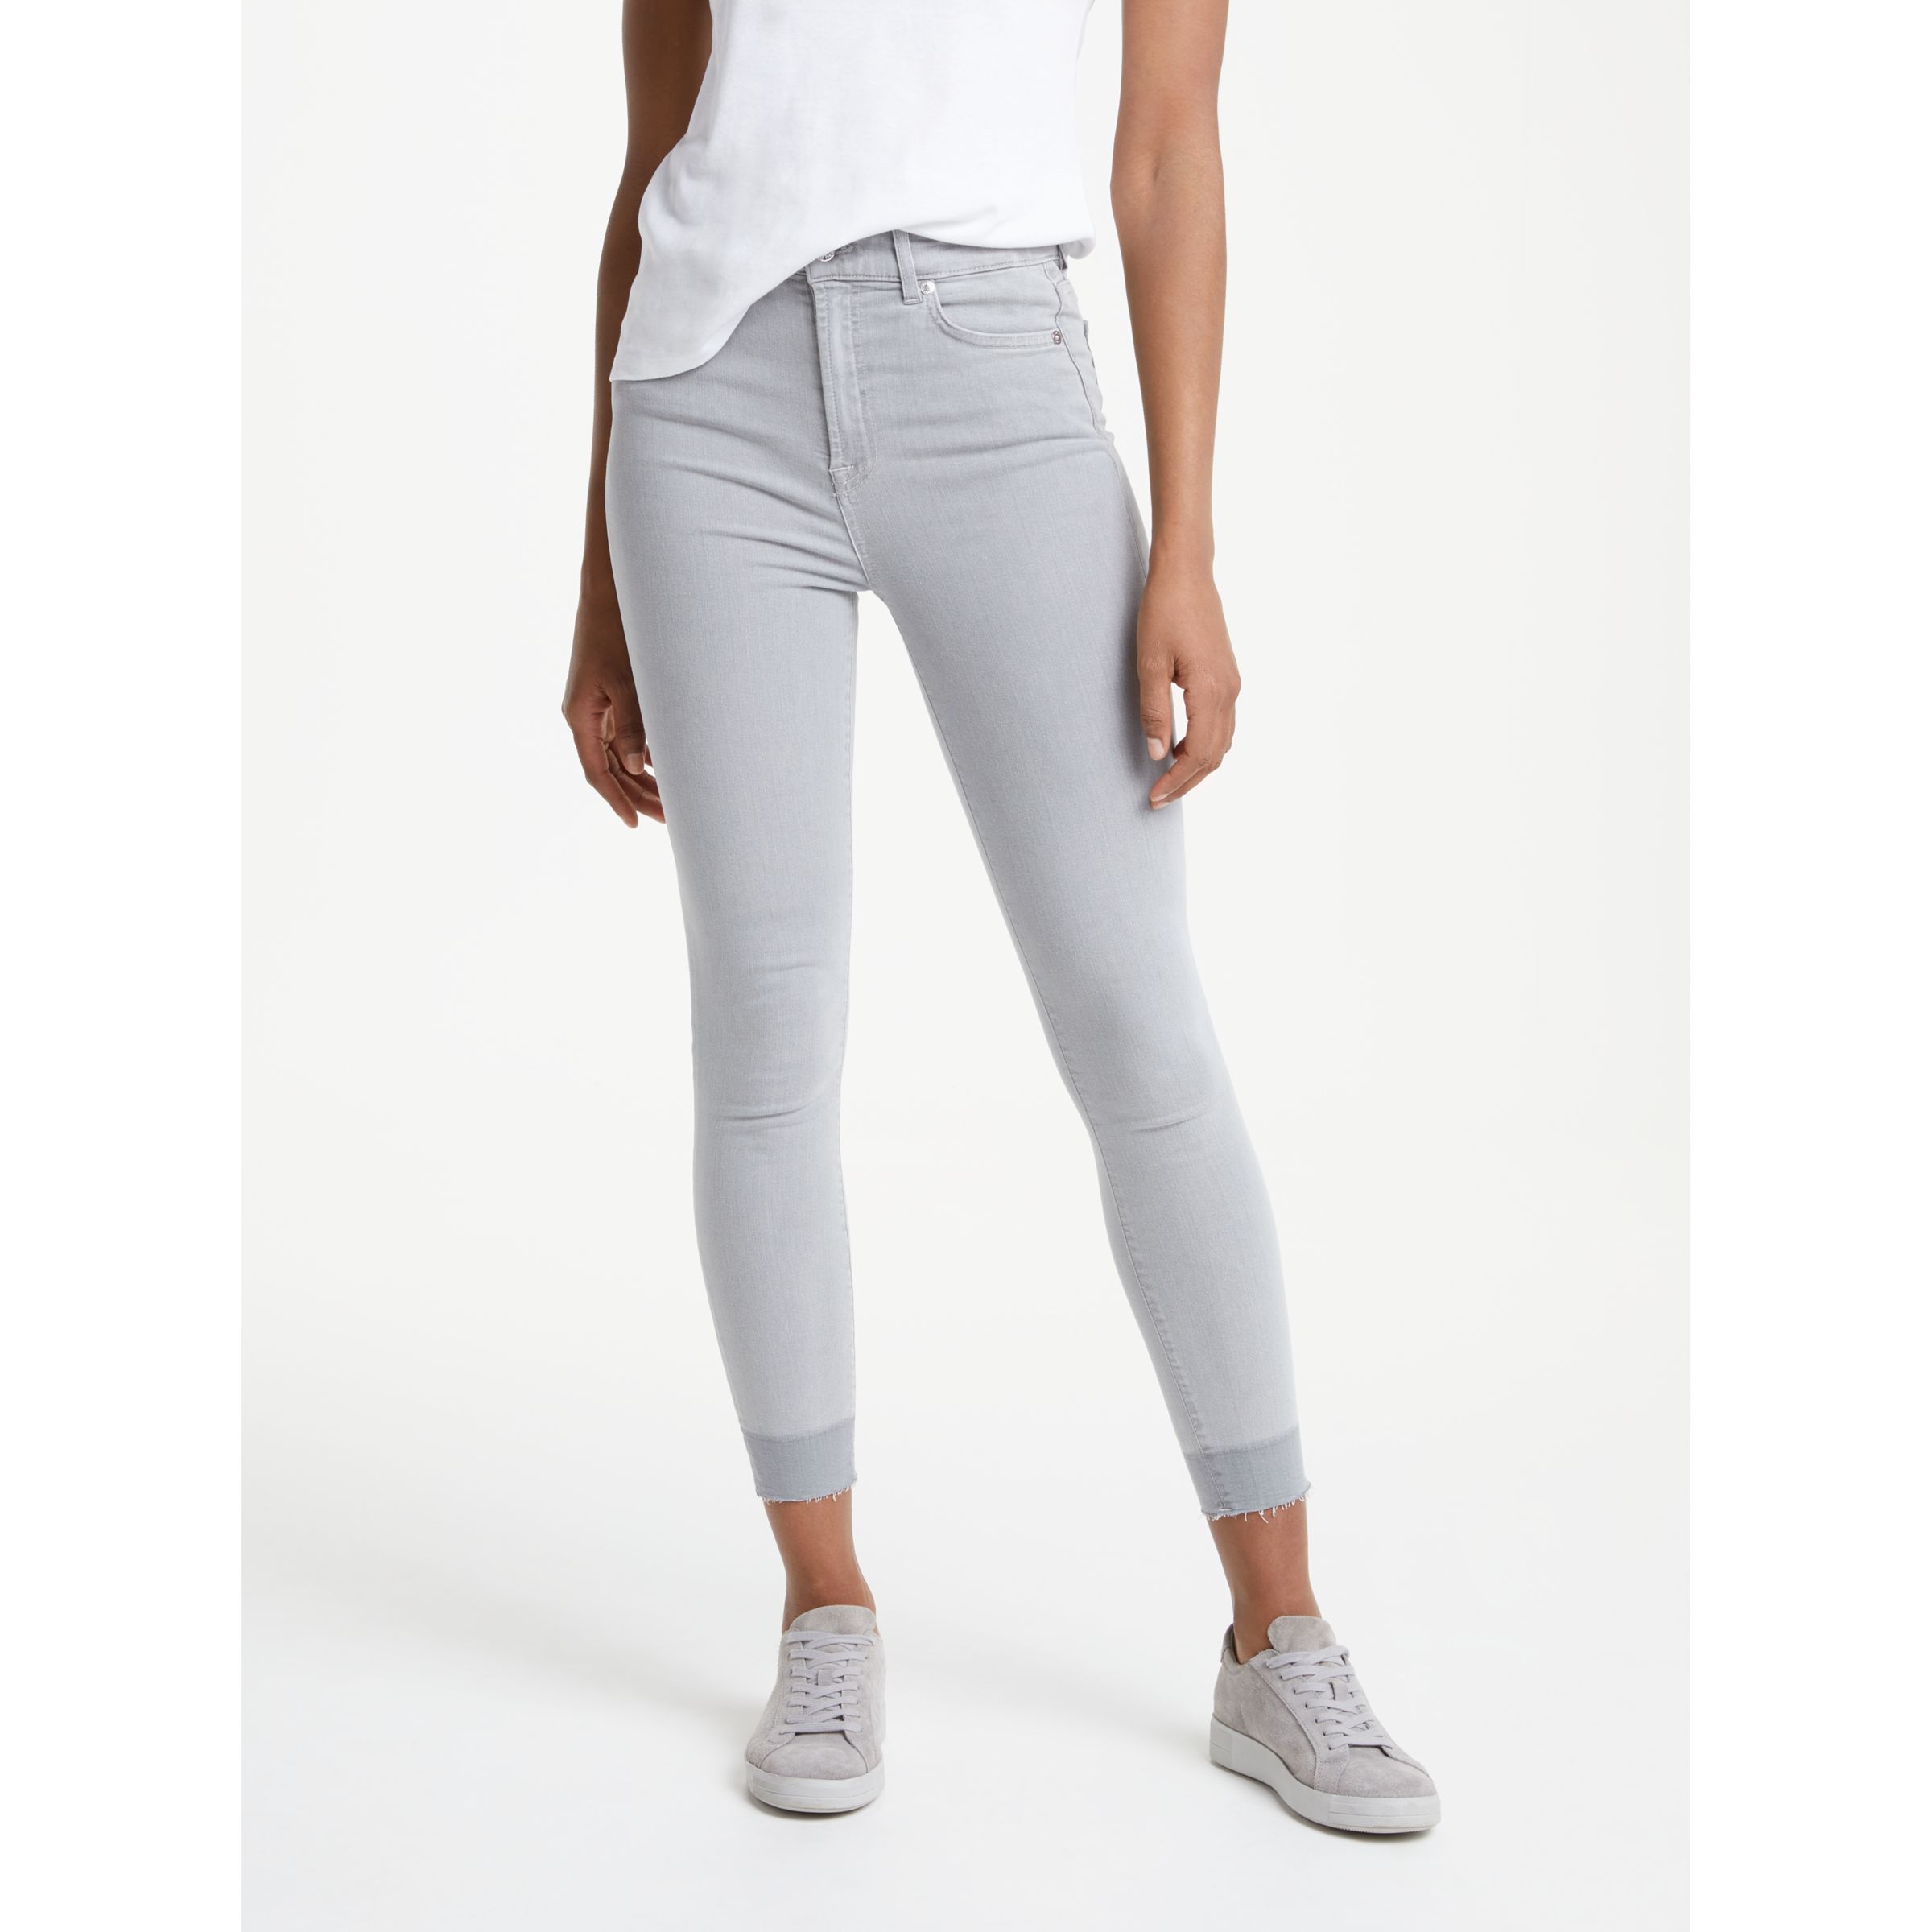 7 For All Mankind Aubrey Unrolled Slim Illusion Jeans, Luxe Uplift